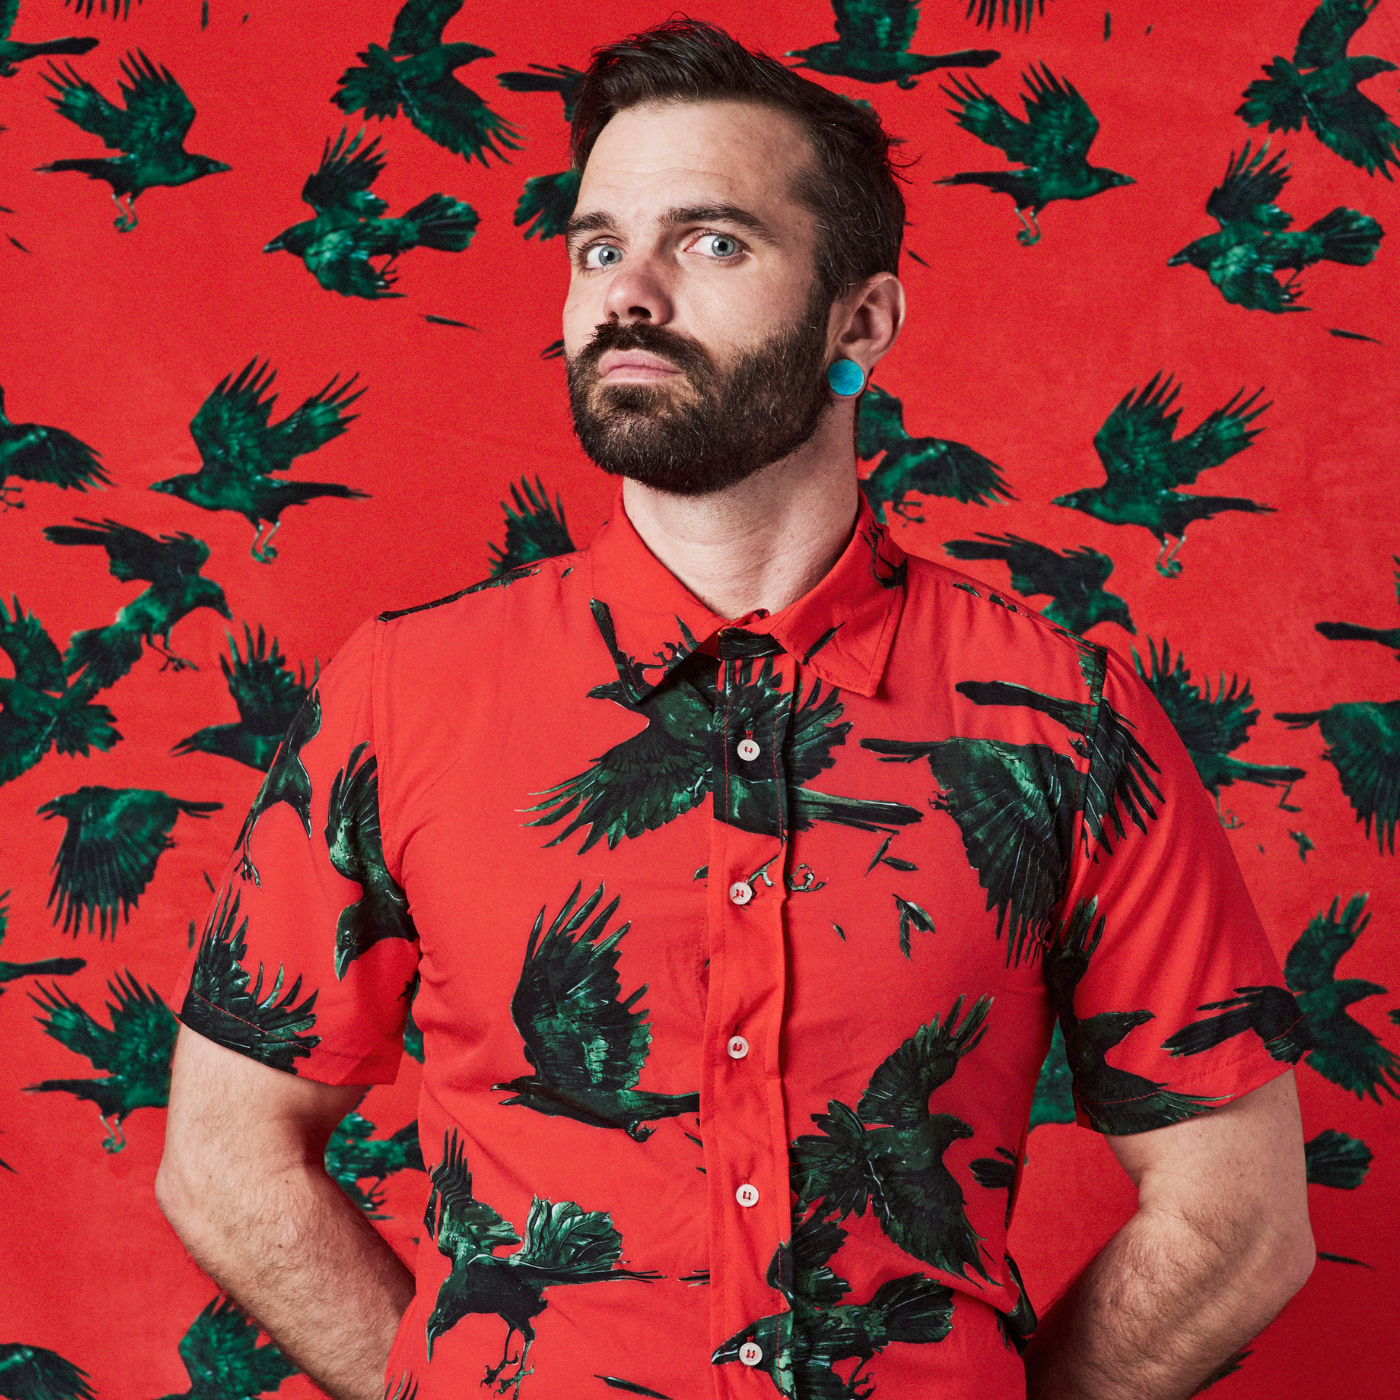 Anthony stands in front of a wall with his hands behind his back and wears a shirt with a red background and a design with green and black ravens. The wallpaper on the wall behind him is the same design as his shirt.